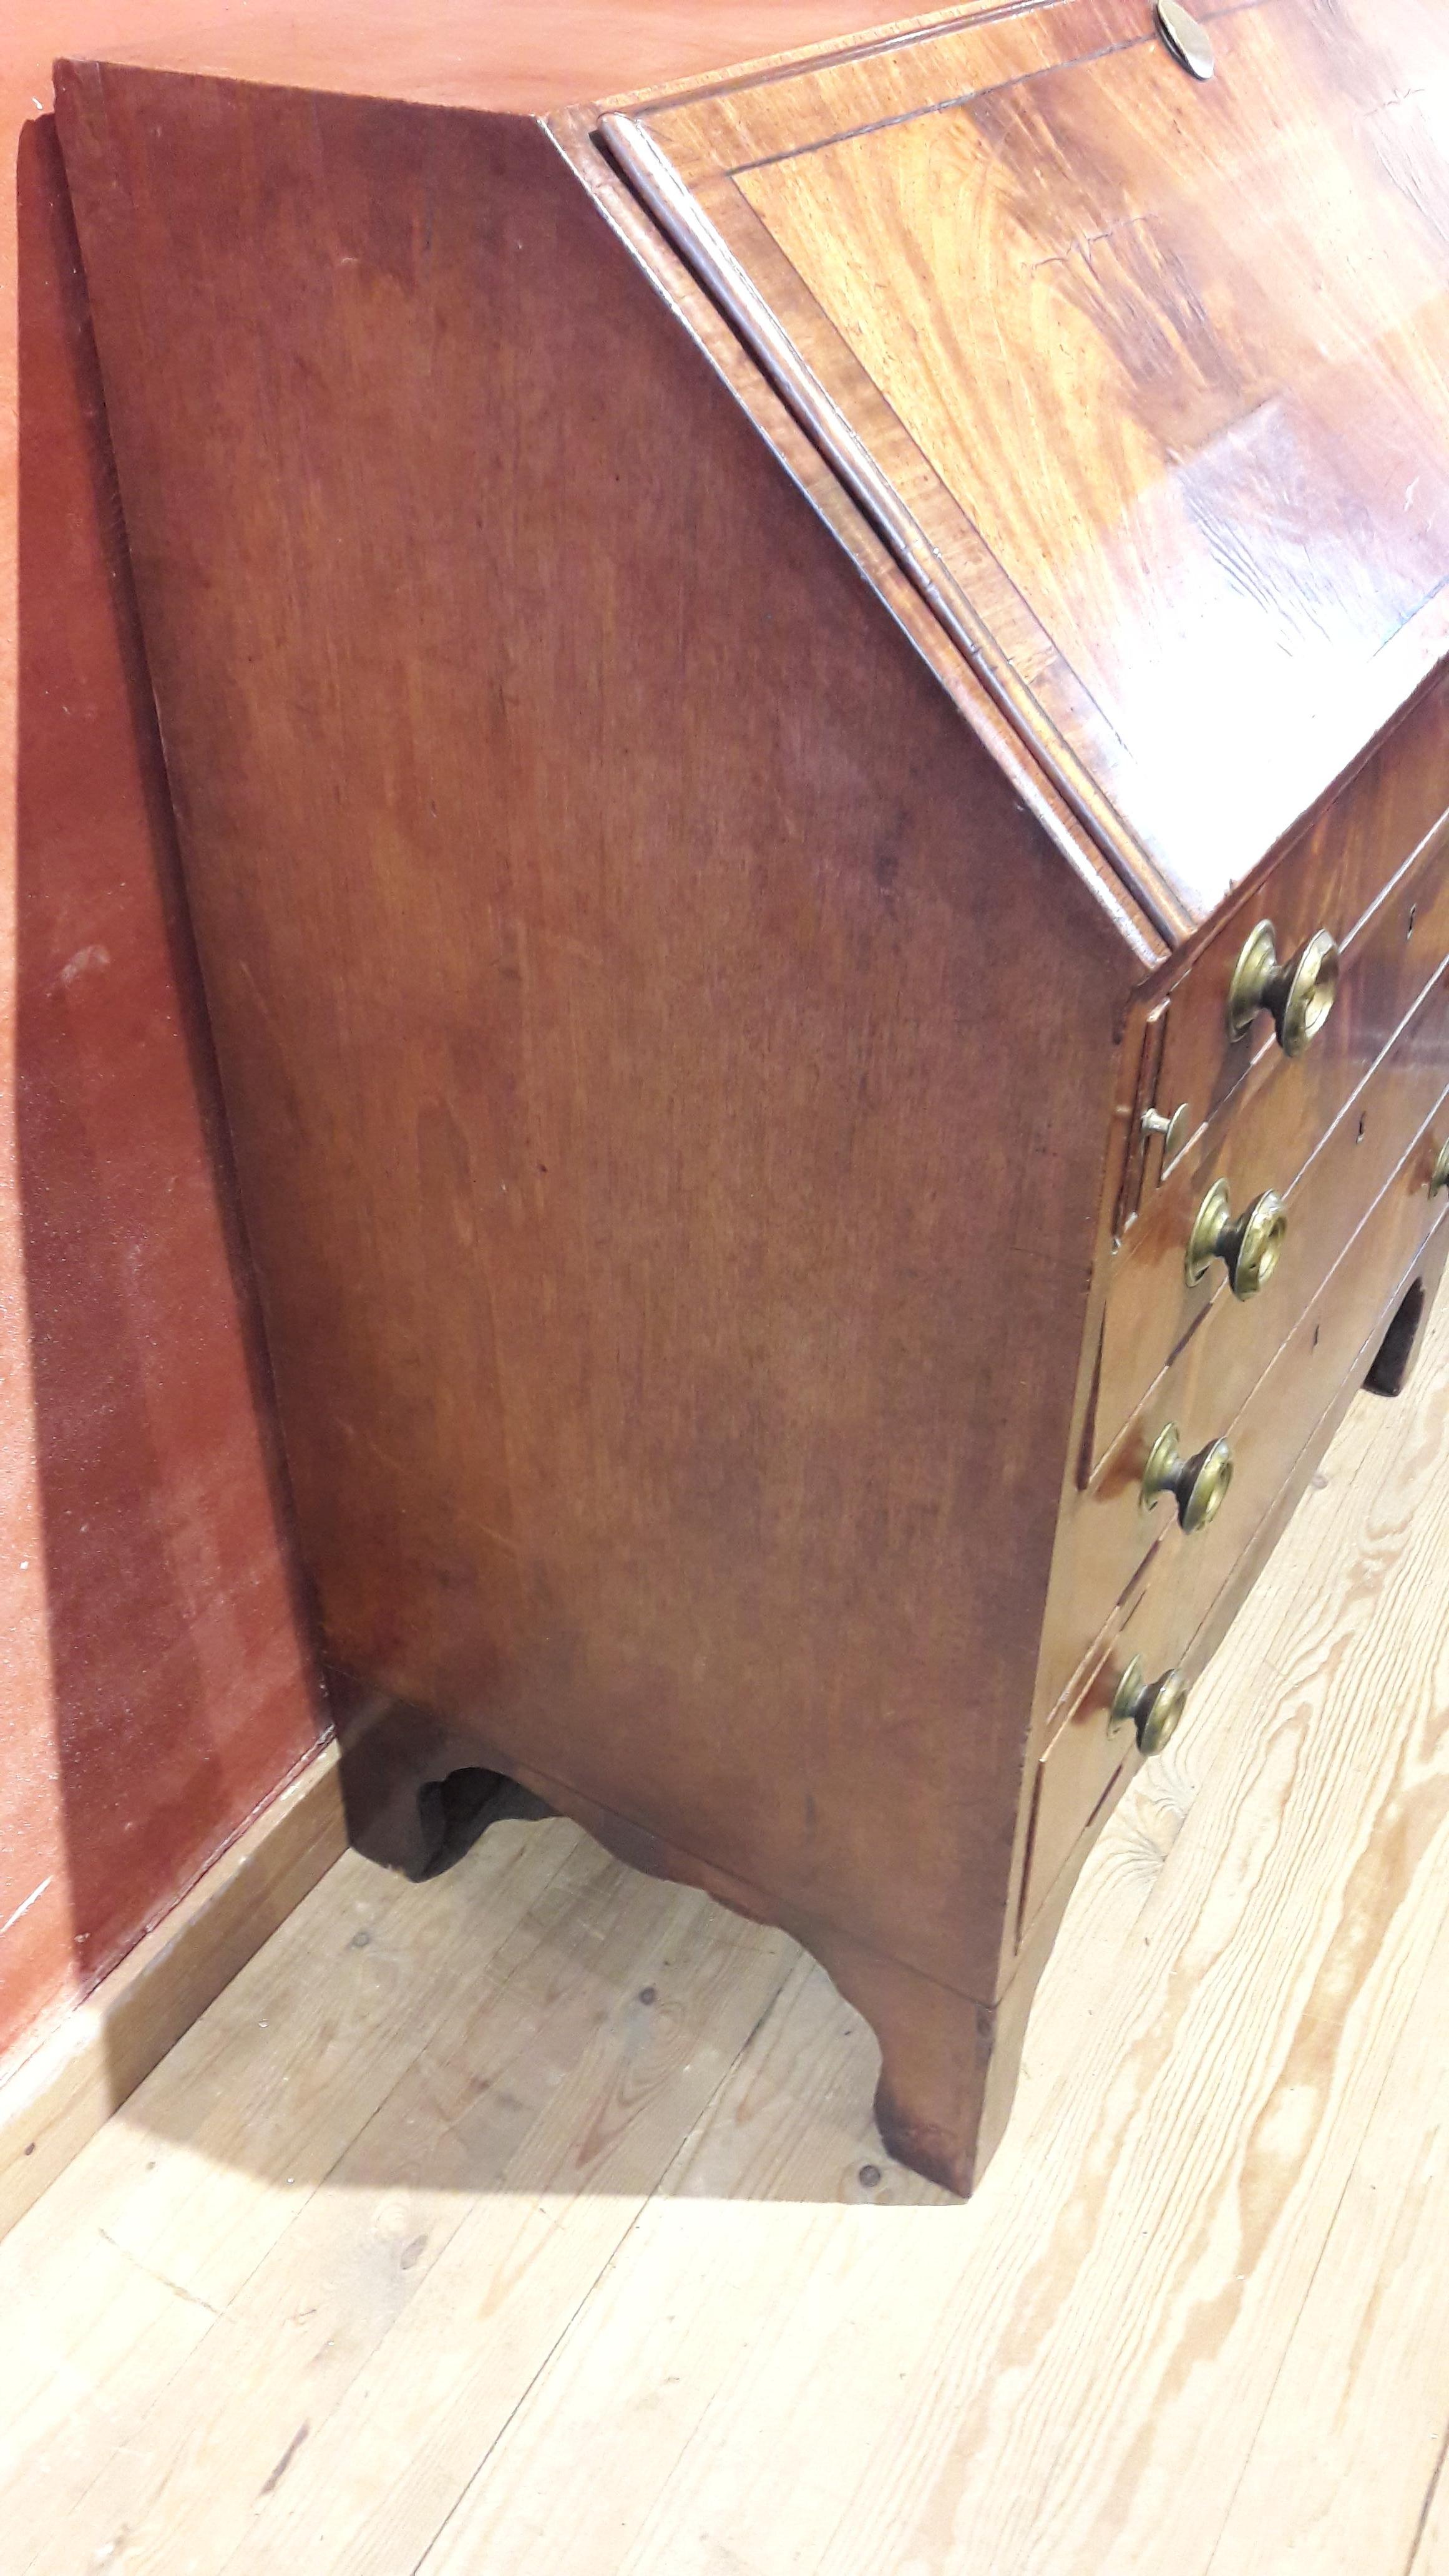 Marvellous mahogany secretaire with small drawers inside. Great patine of the wood. A real Classic piece.